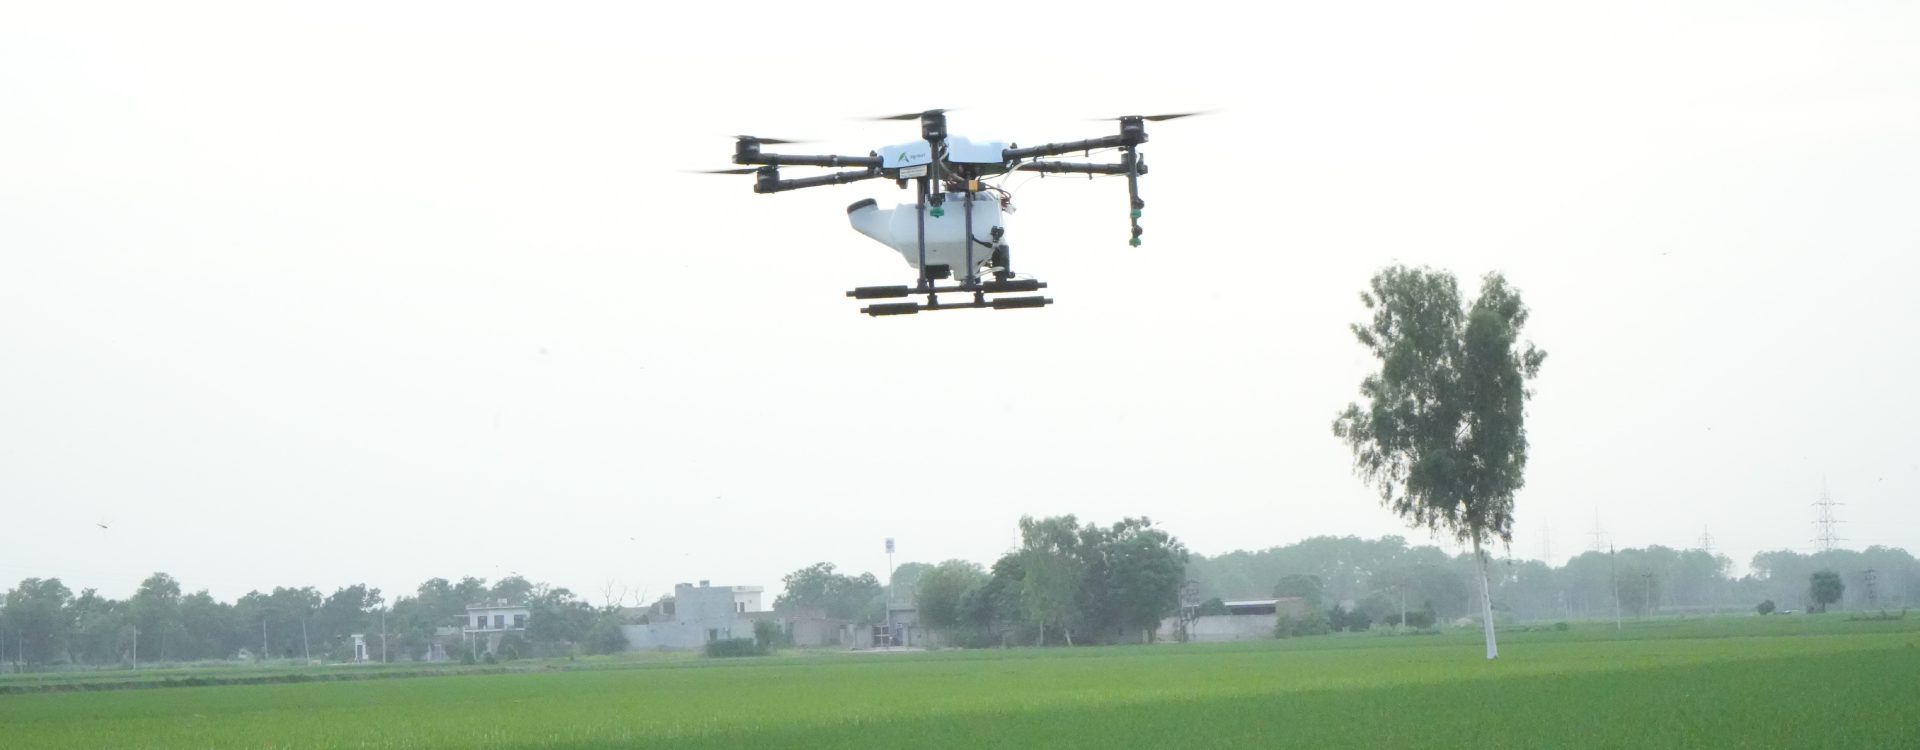 Types of drones used in agriculture